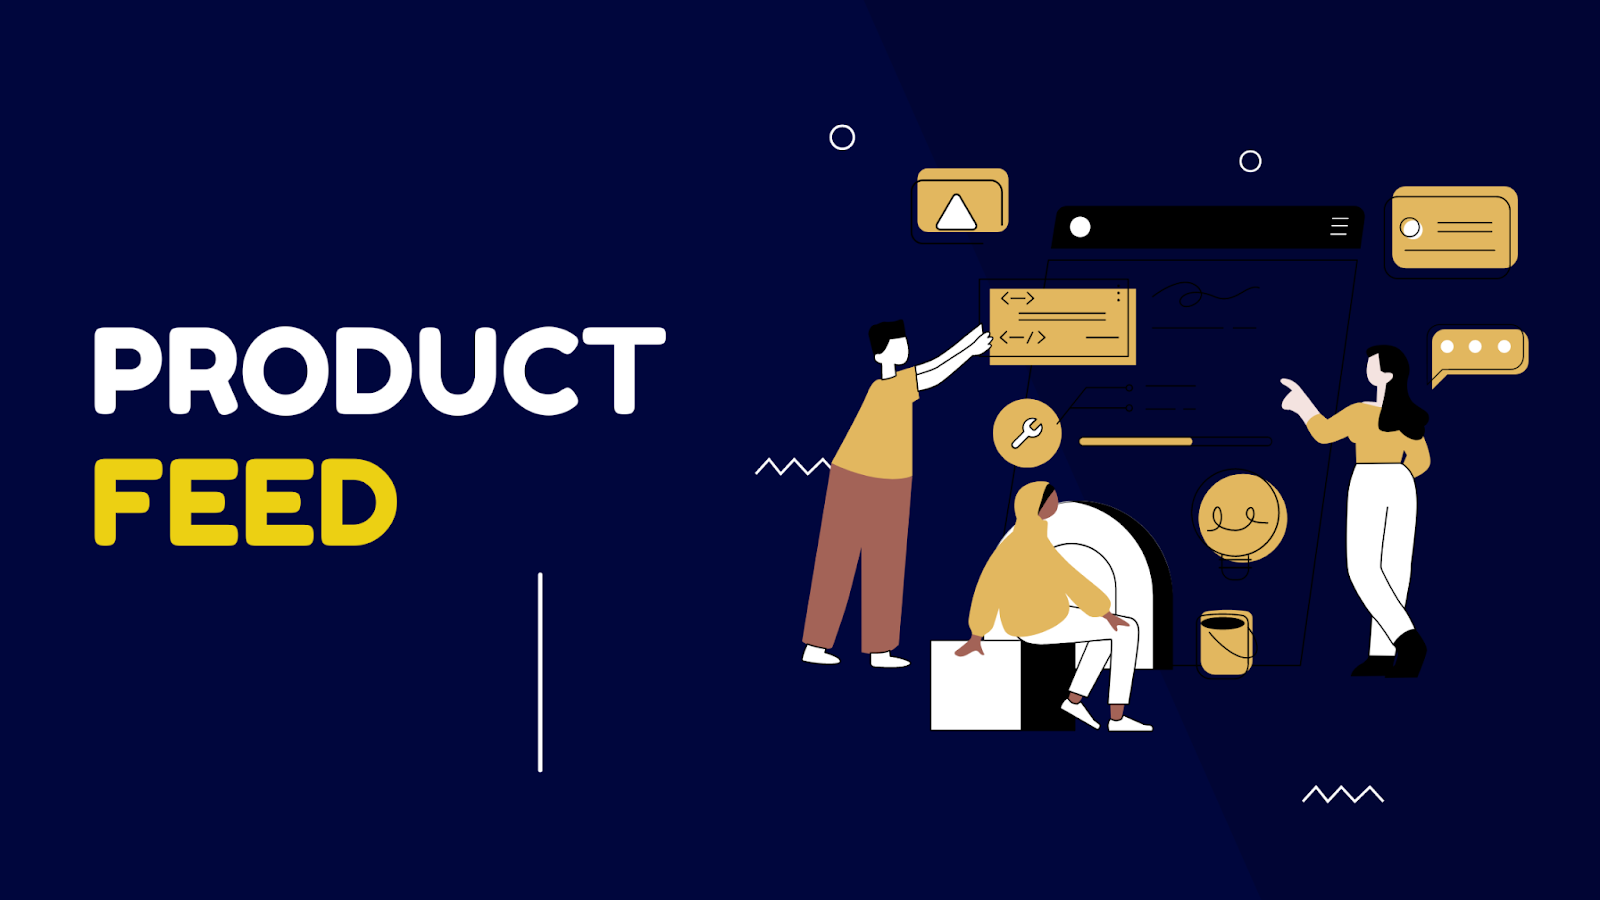 Learn what product feed is